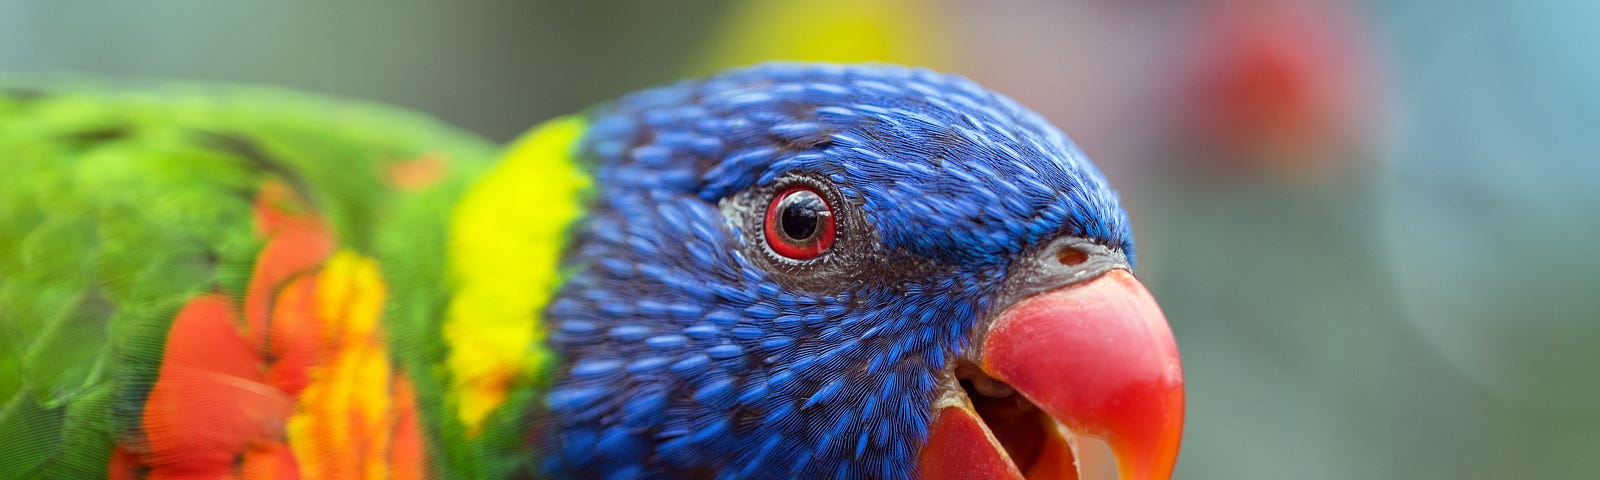 A bright multi-colored parrot (green, orange, yellow, blue) peering closely into the camera.